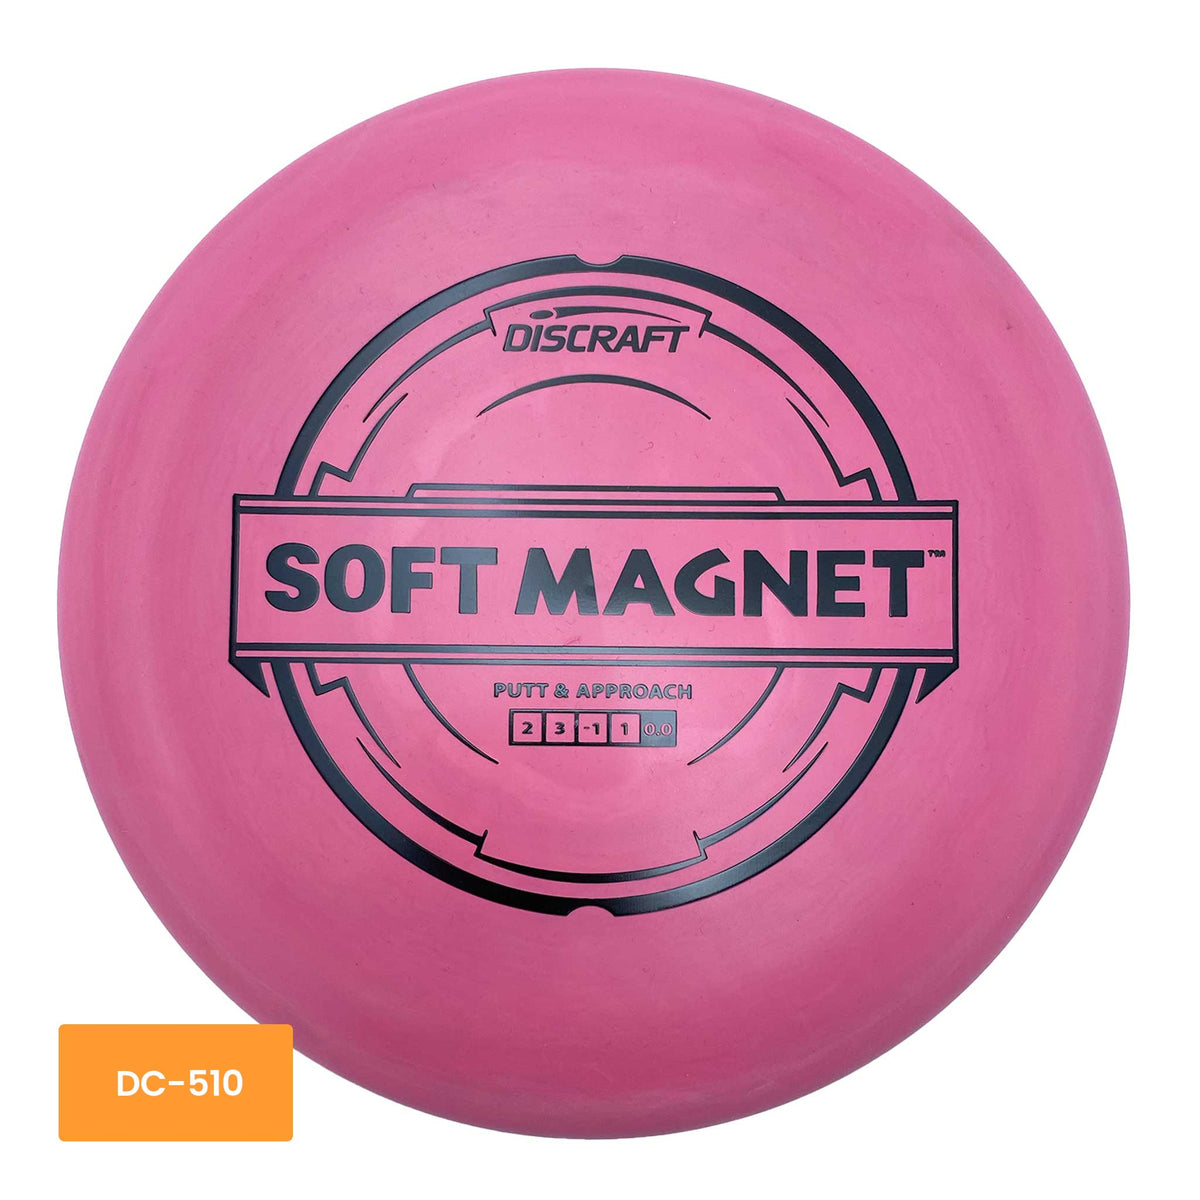 Discraft Soft Magnet putter and approach - Pink